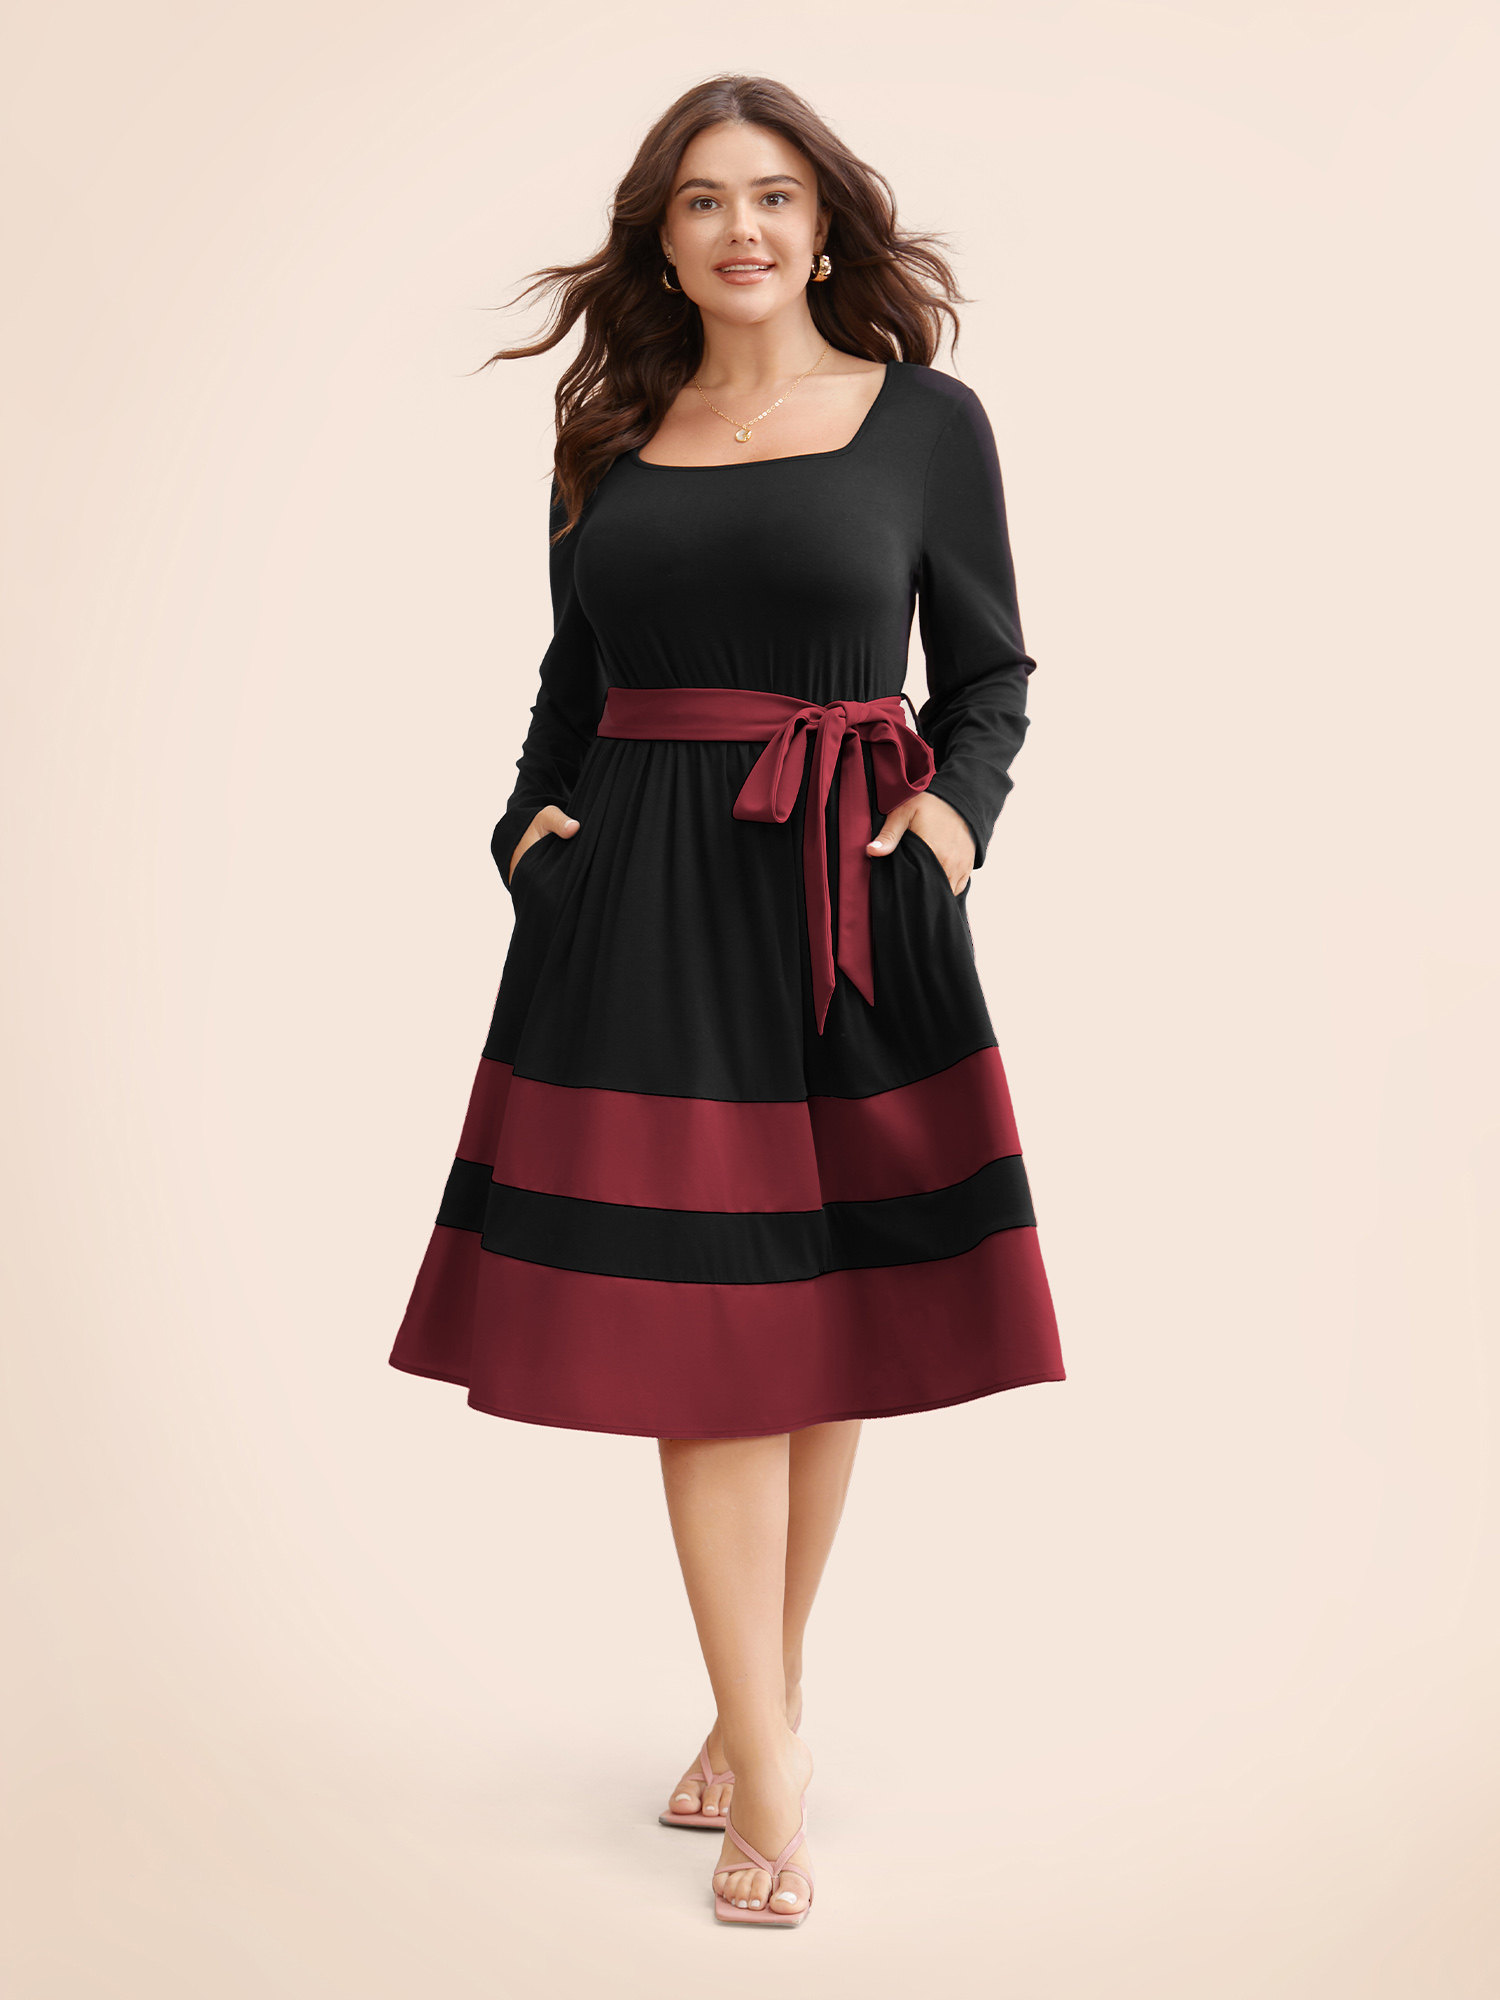 

Plus Size Two Tone Belted Bowknot Square Neck Dress Burgundy Women Elegant Non Square Neck Long Sleeve Curvy Knee Dress BloomChic